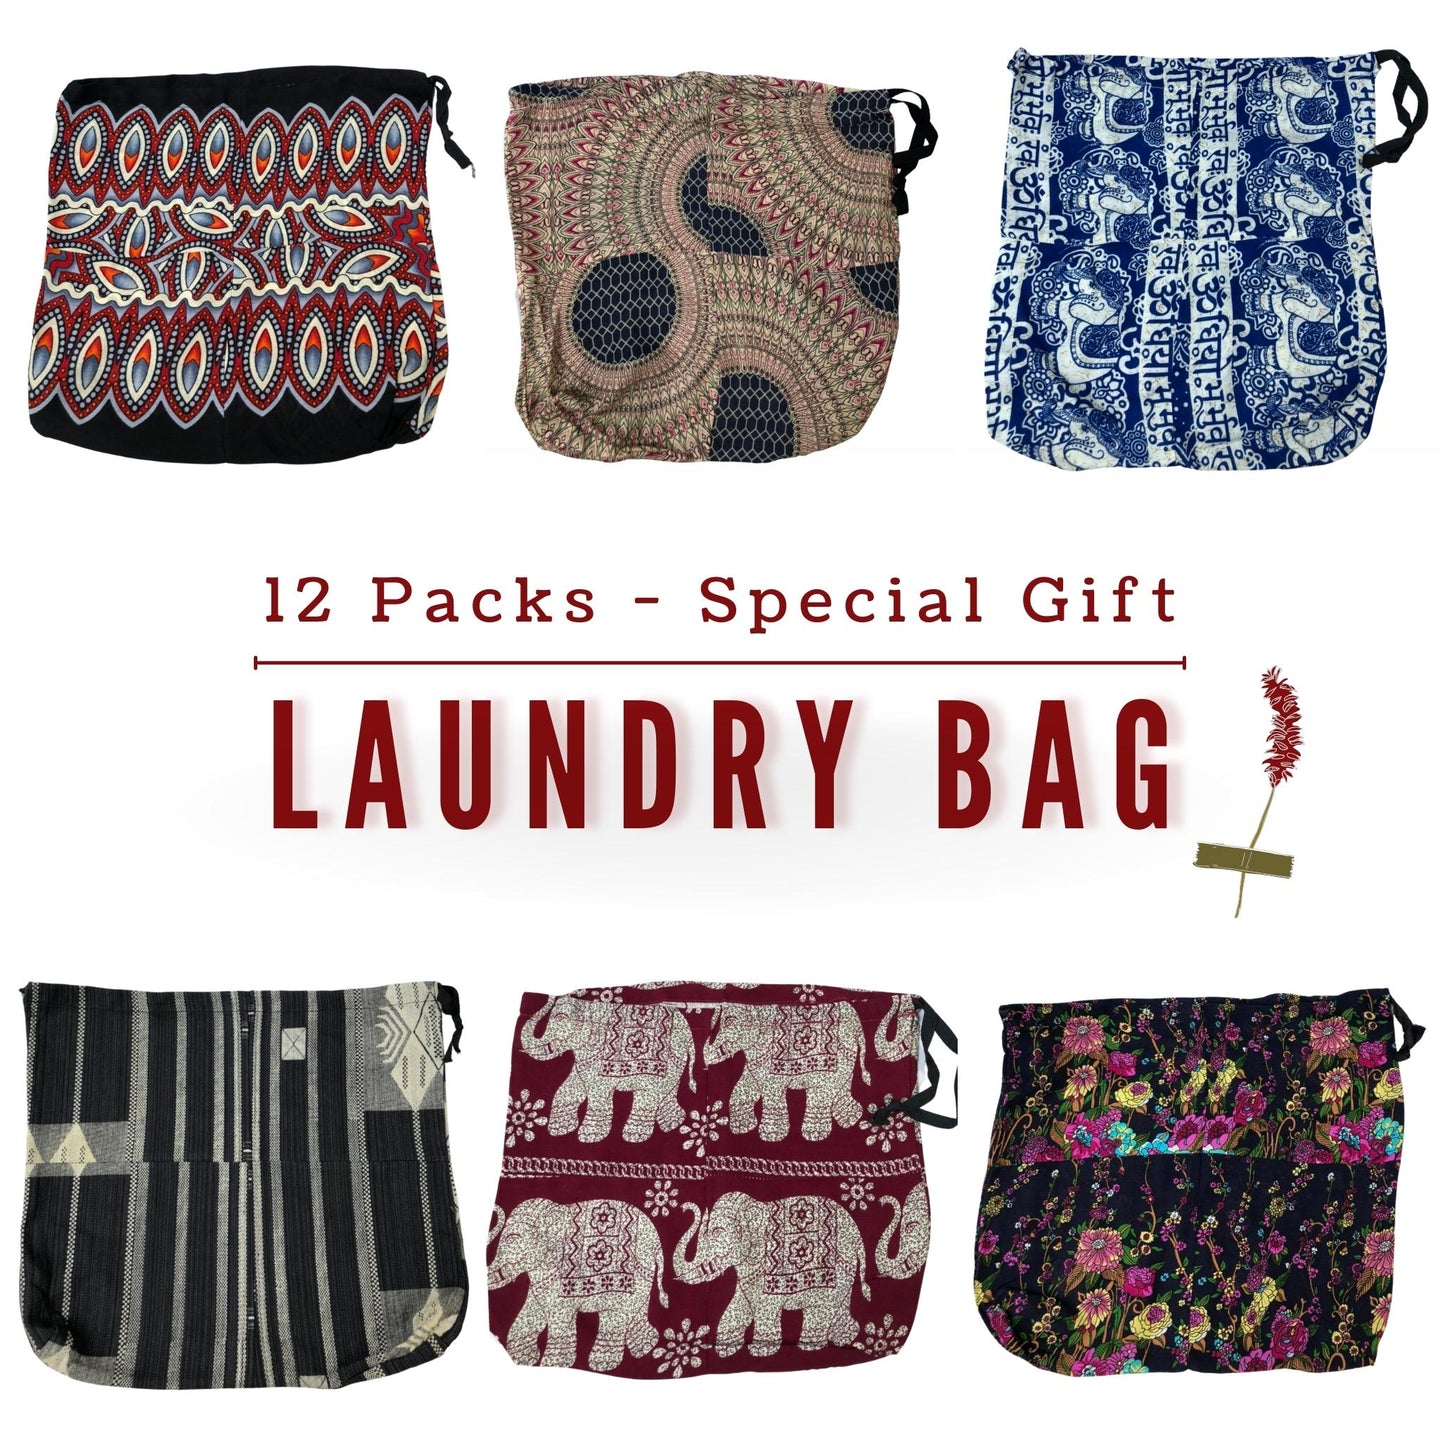 SPECIAL GIFT Laundry Bags - 12 packs! AC0016